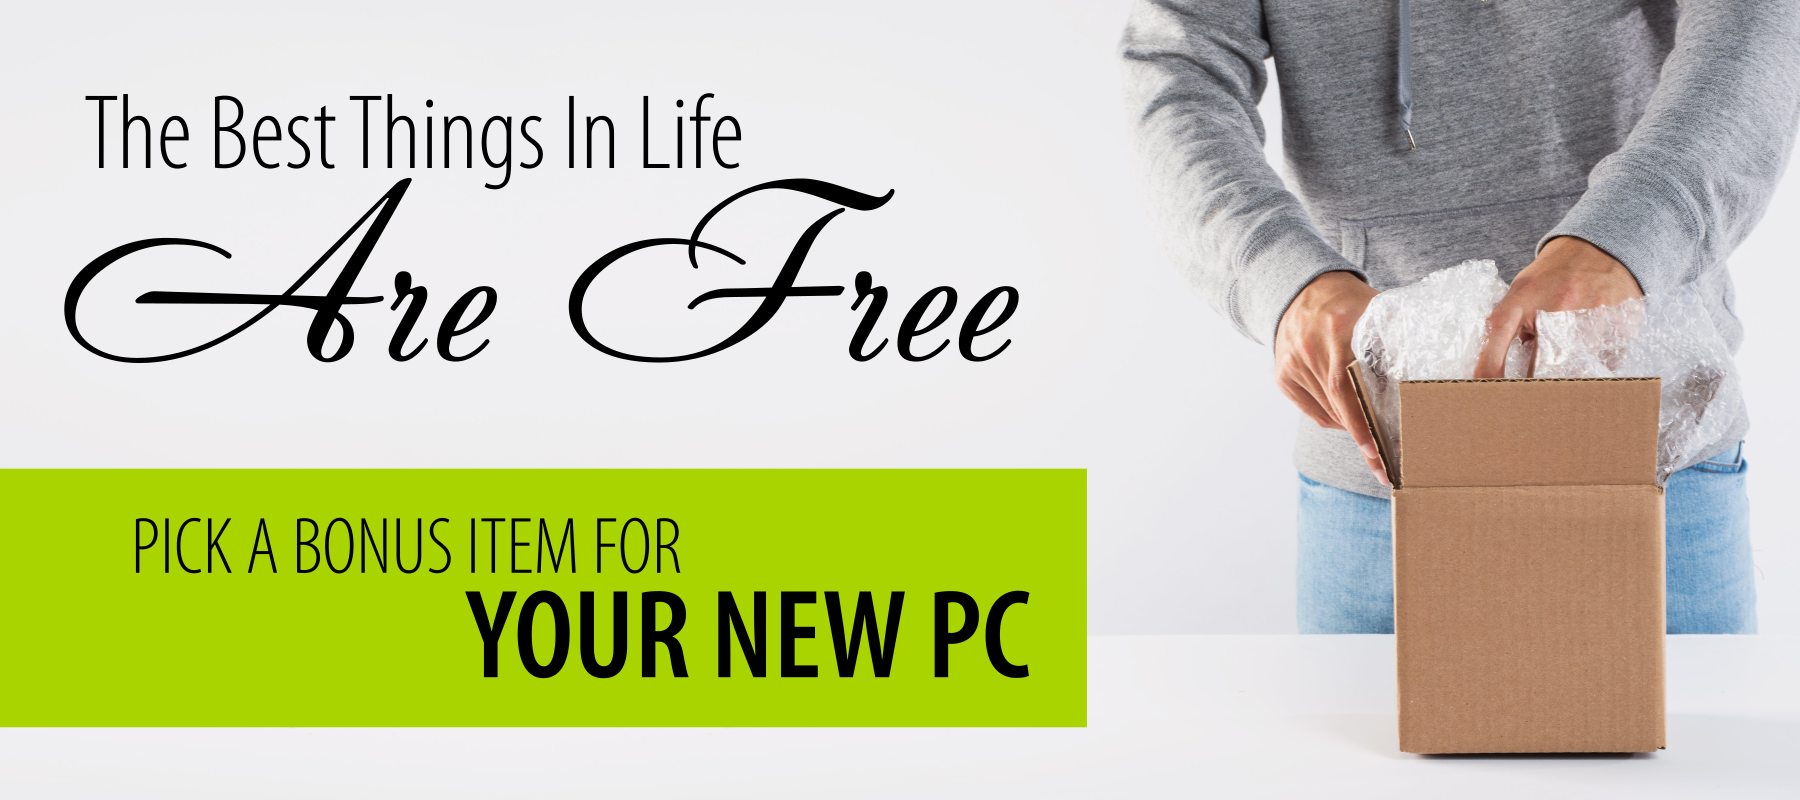 The Best Things in Life ARE FREE! More Gaming Options Added! - Signa